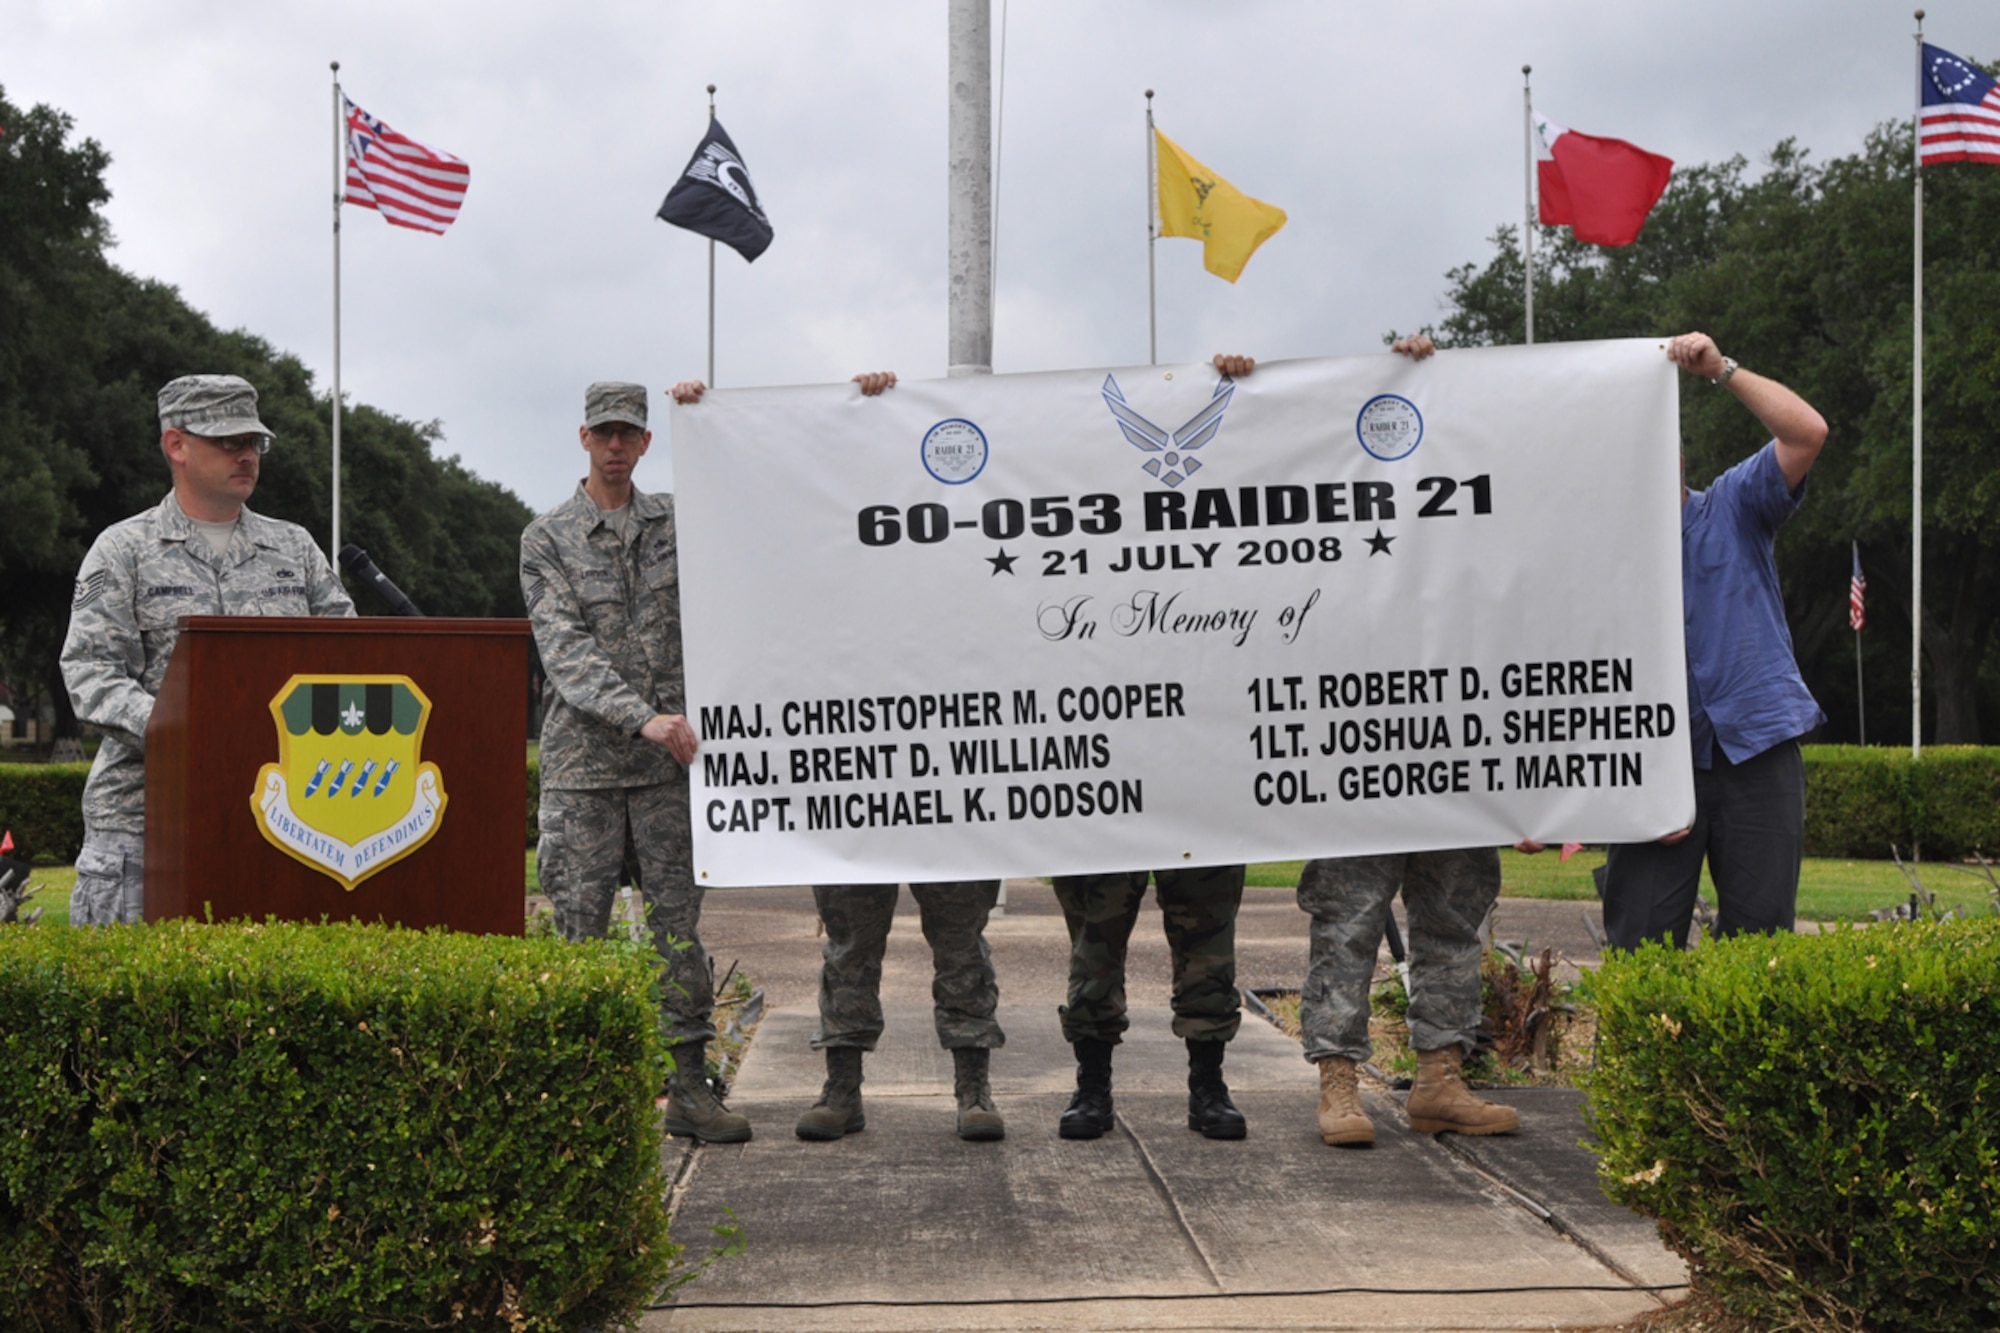 Members of the Barksdale Freedom Riders display a banner during the RAIDR 21 Remembrance Ceremony at 2nd Bomb Wing Headquarters flag pole on Barksdale Air Force Base, La., July 21, 2009. The ceremony remembered the crew of RAIDR 21, a B-52 Startofortress that crashed off the coast of Guam a year ago today. The Barksdale Freedom Riders is an organization that focuses on safety, Camaraderie and Esprit De Corps and giving back to the community. (U.S. Air Force photo/Tech. Sgt. Jeff Walston) 